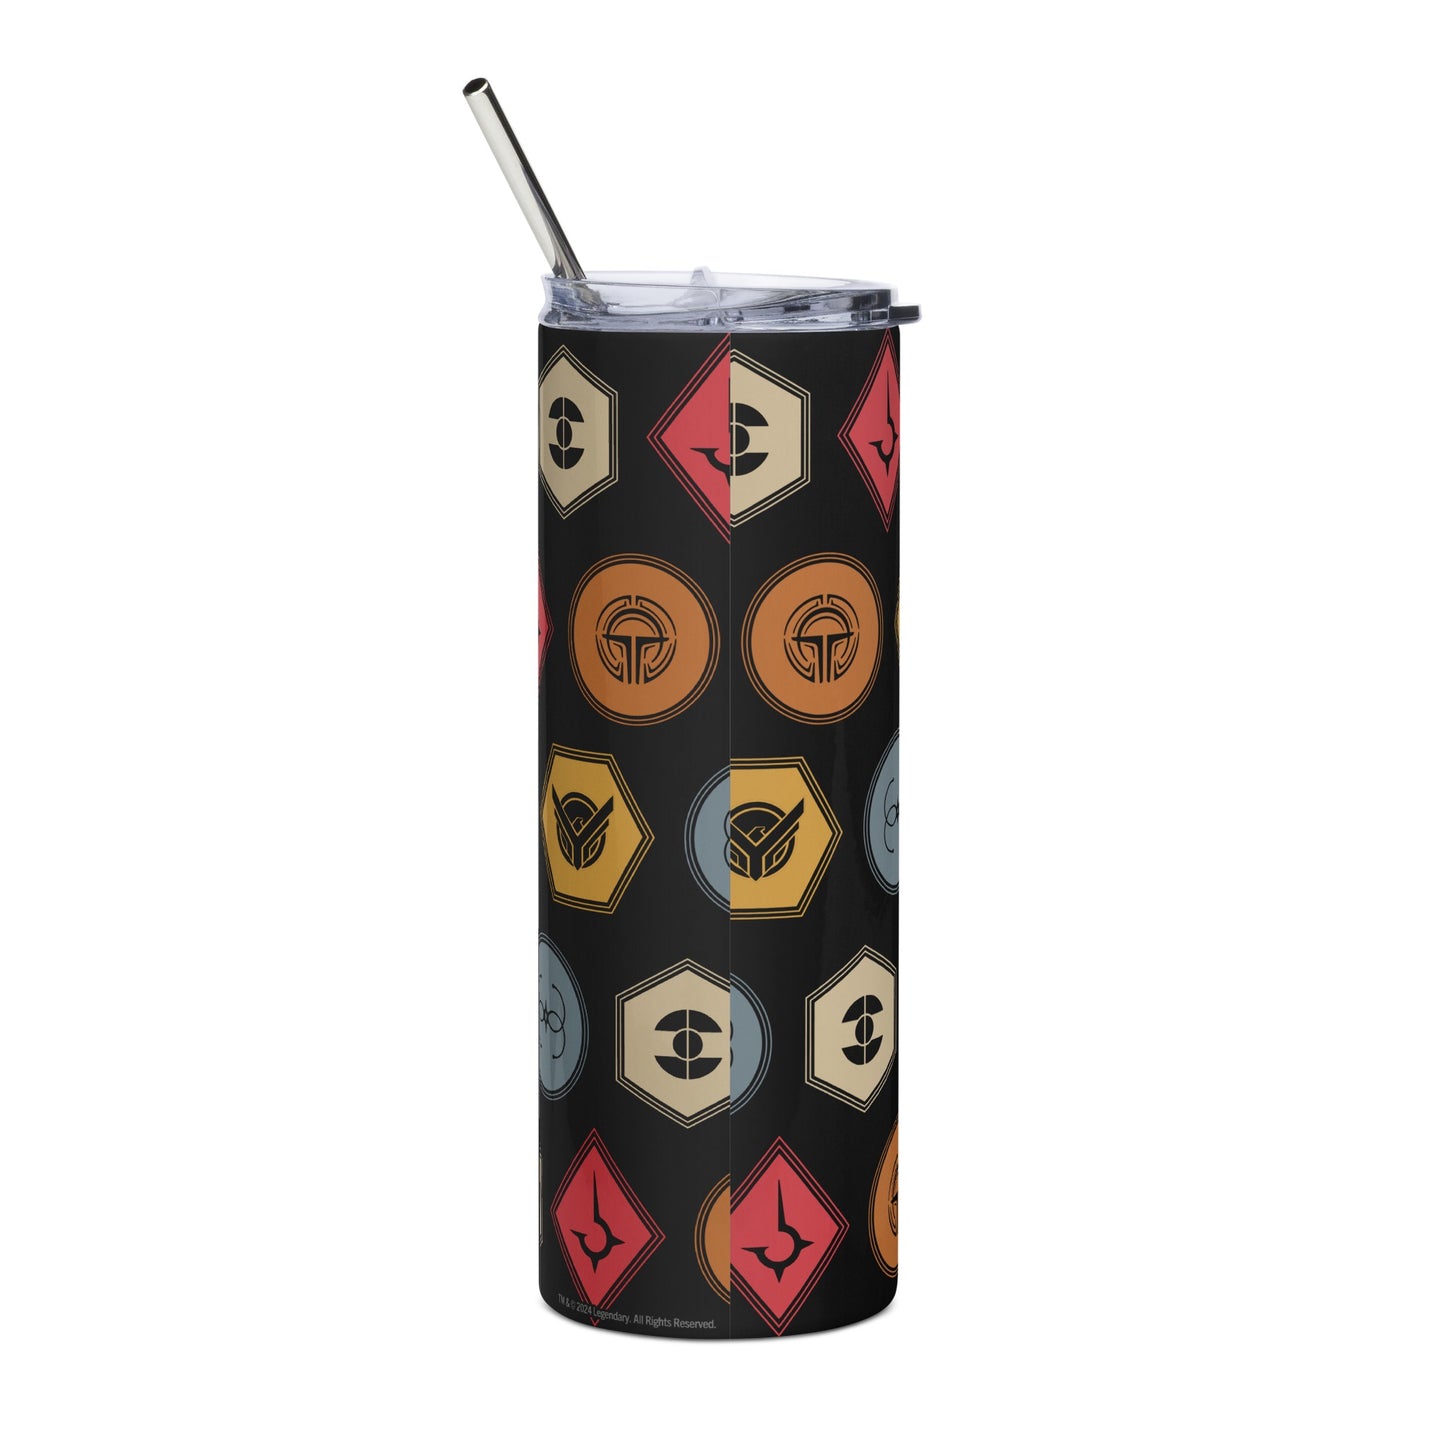 Dune House Emblems Stainless Steele Tumbler